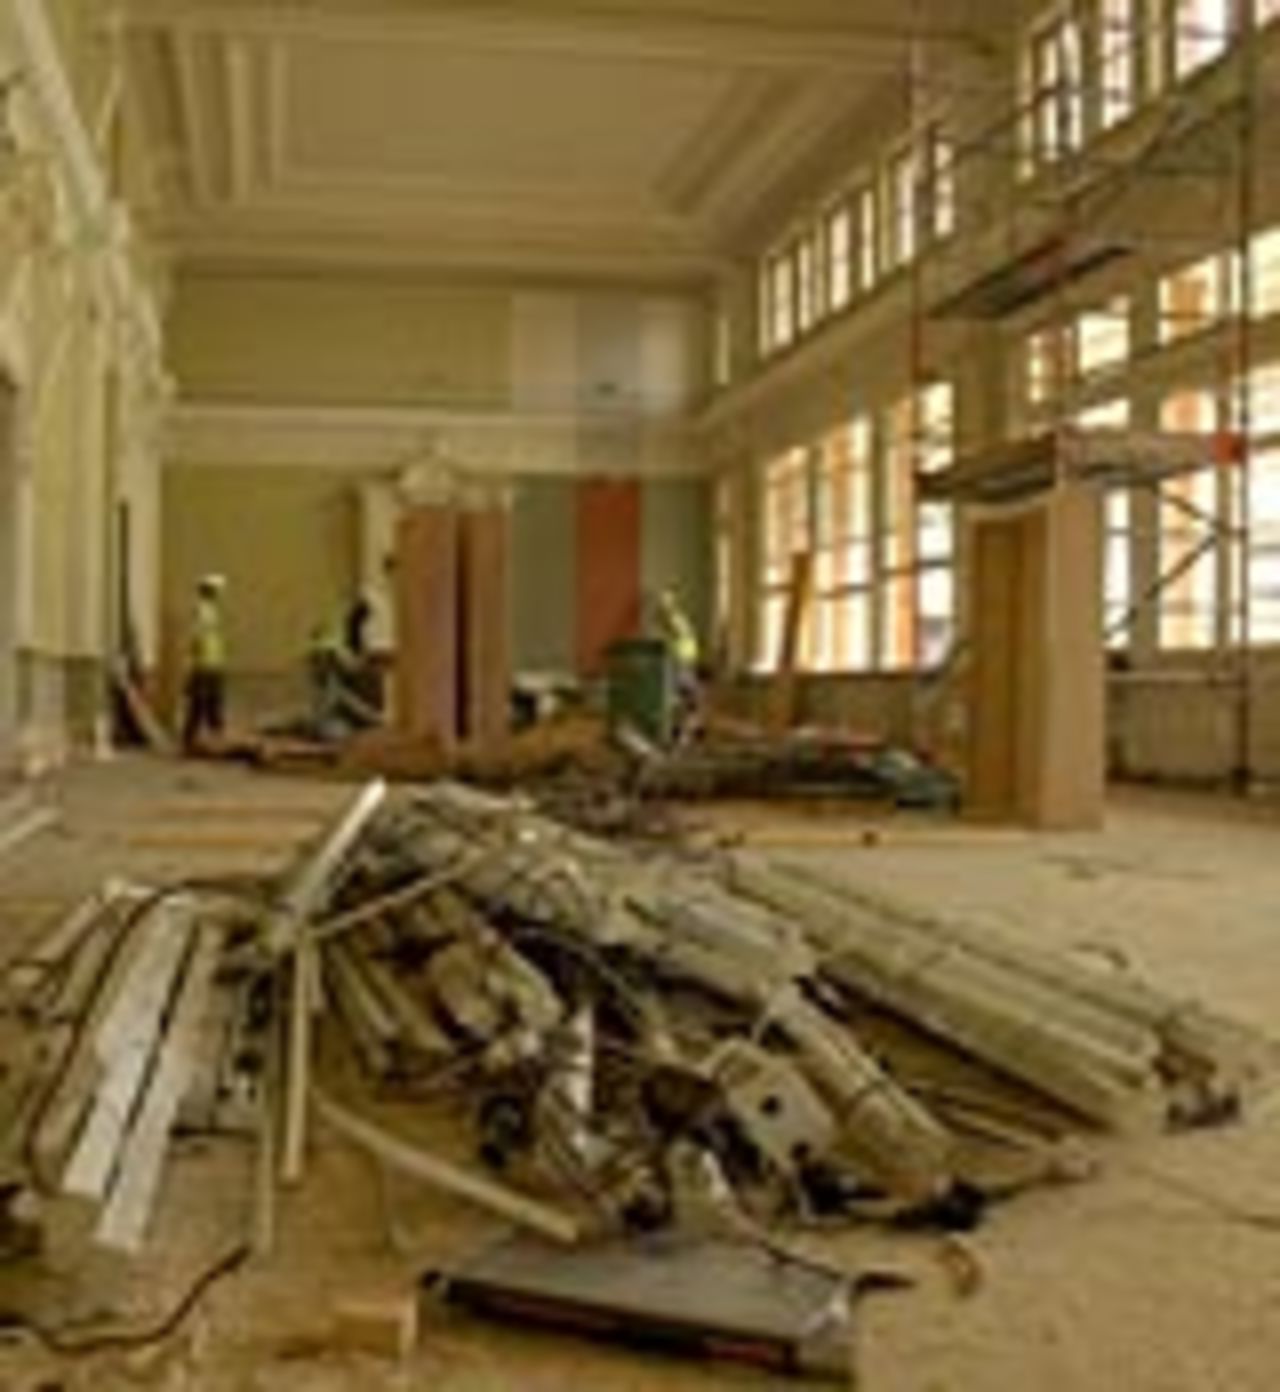 Refurbishment work underway inside the pavilion at Lord's, October 2004